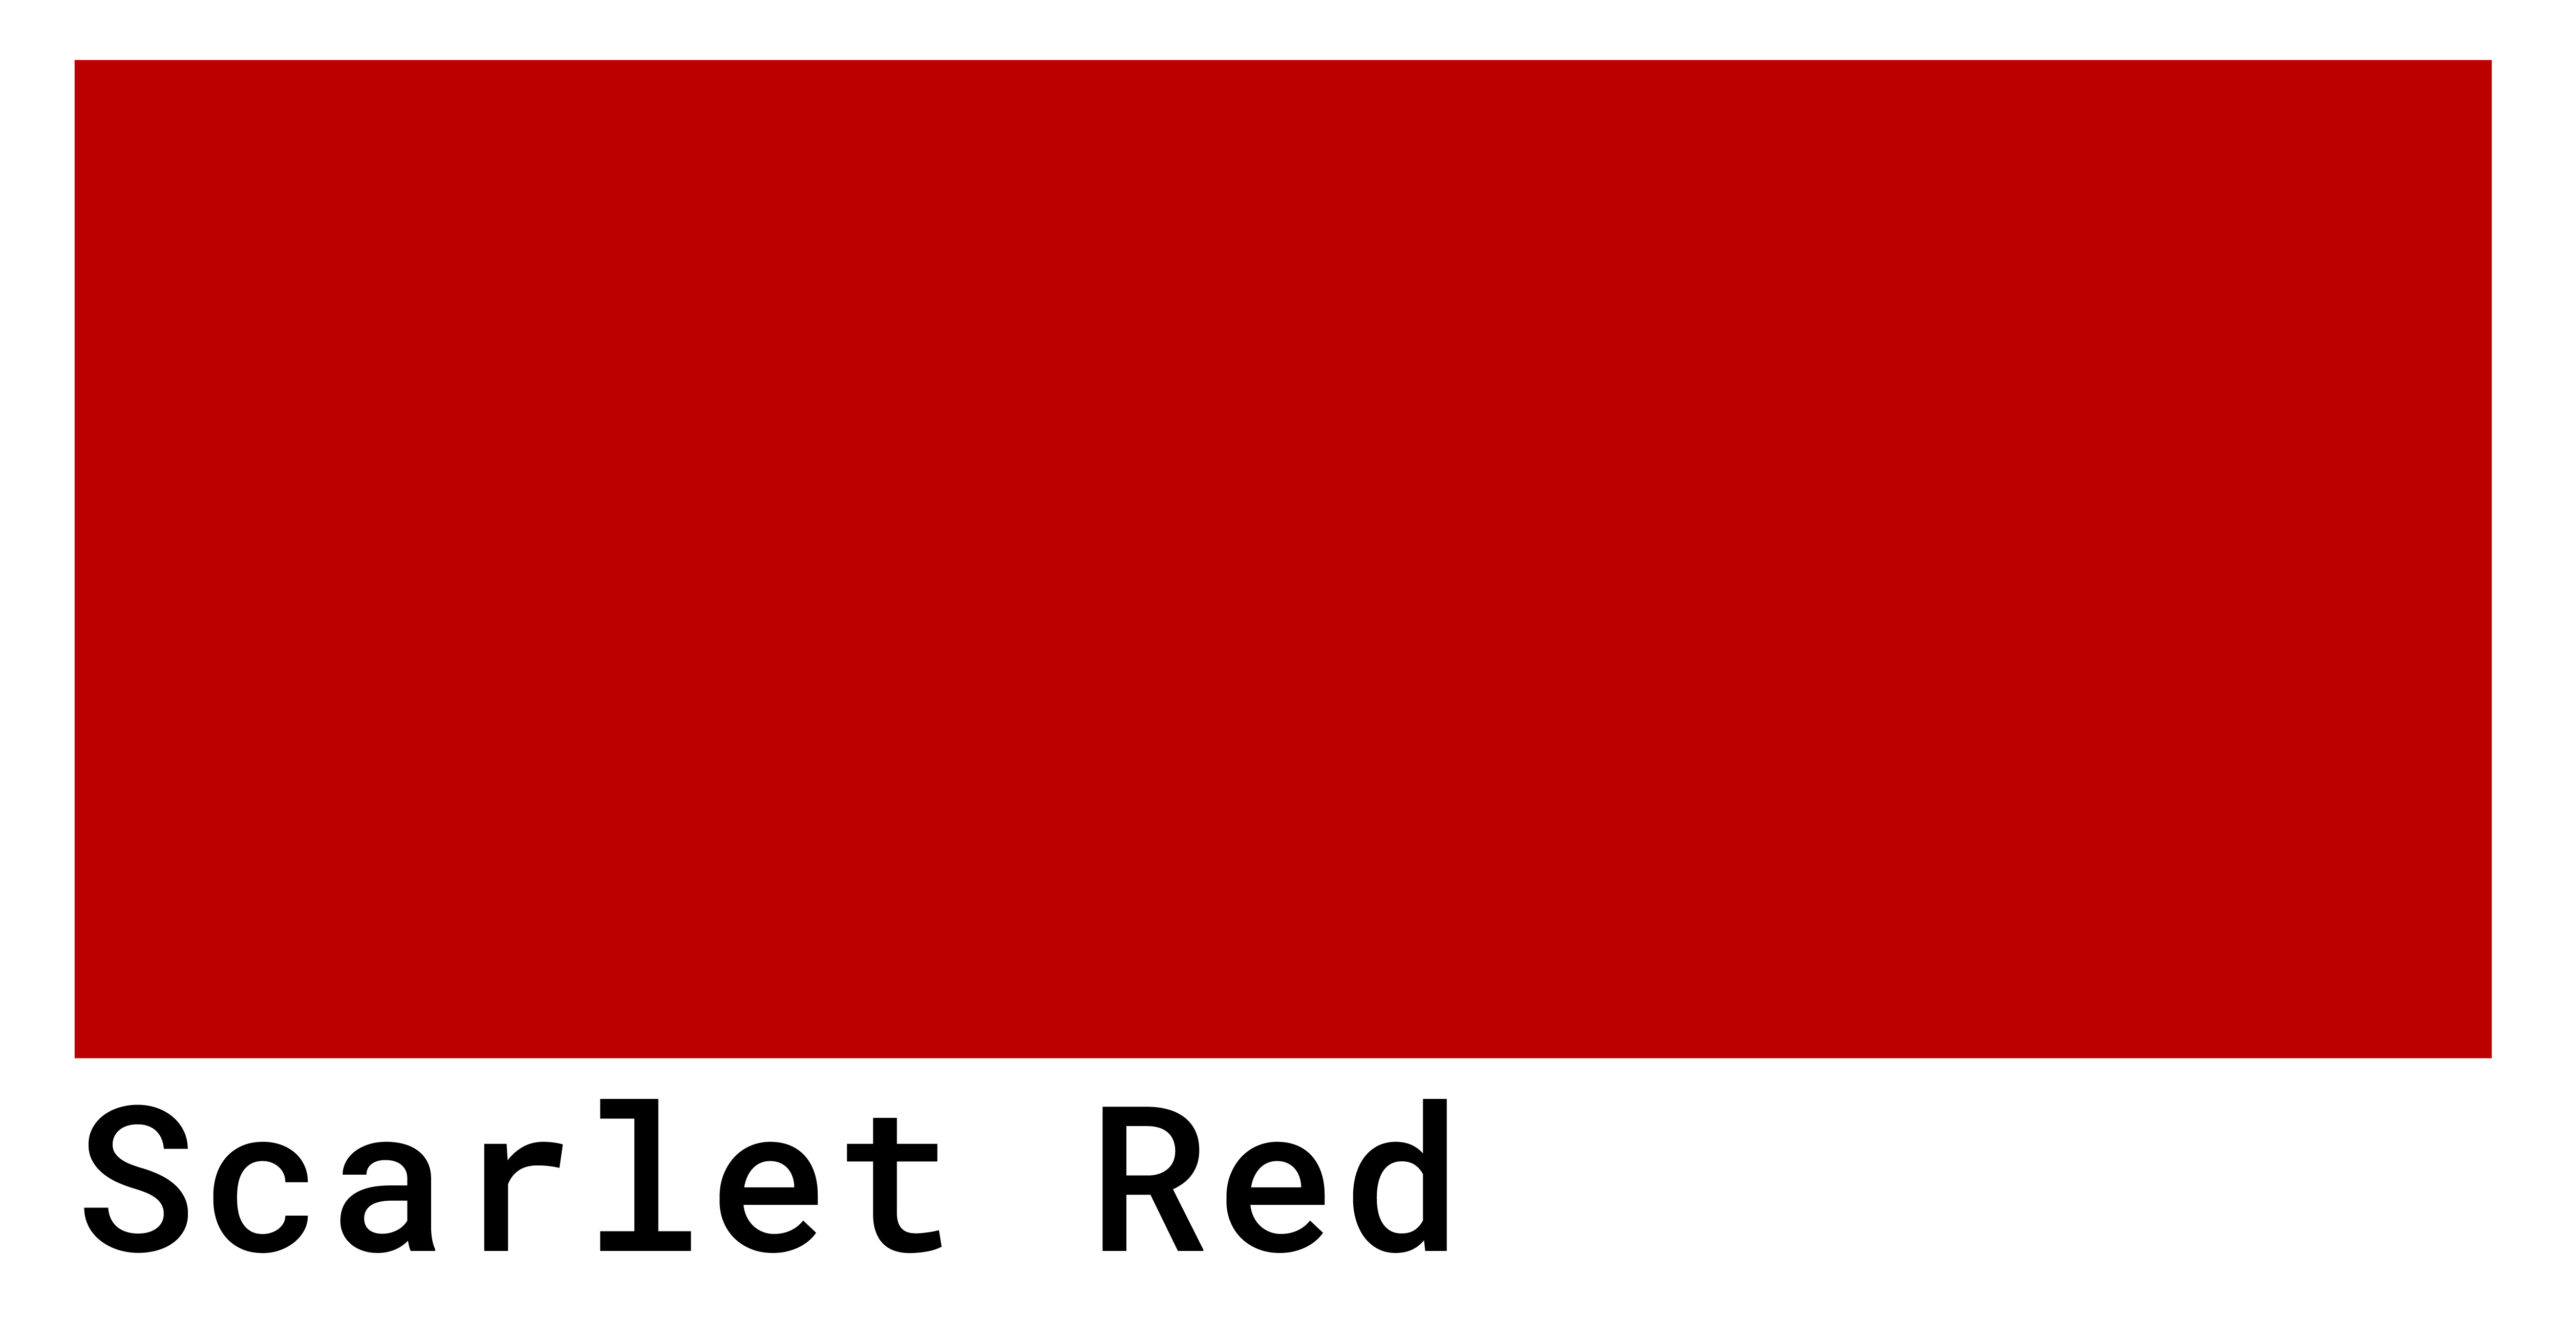 scarlet red color swatch scaled